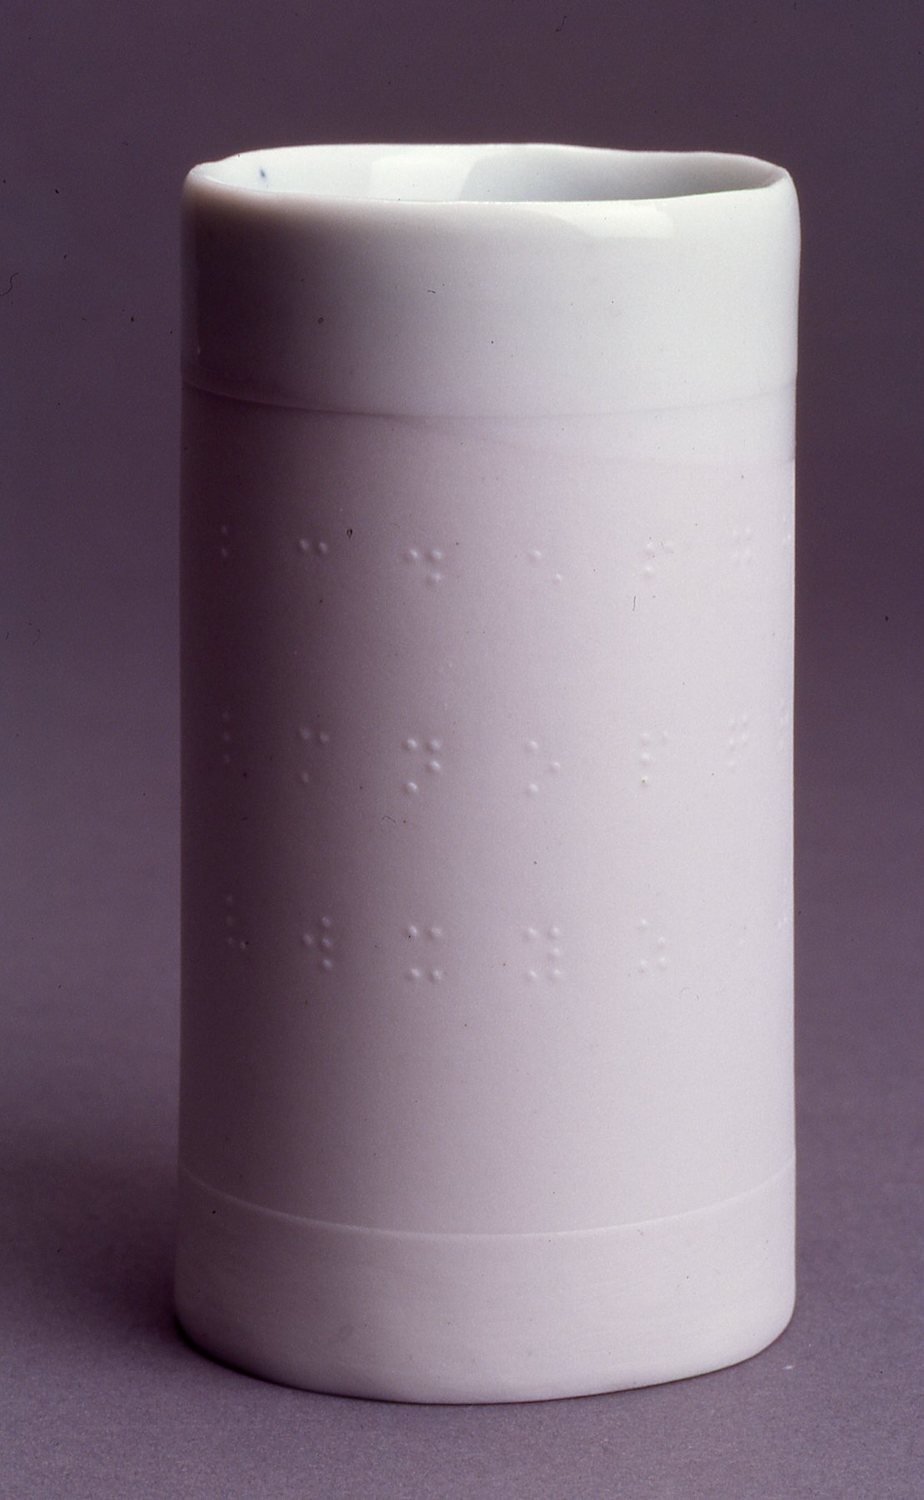 "Braille Cup"